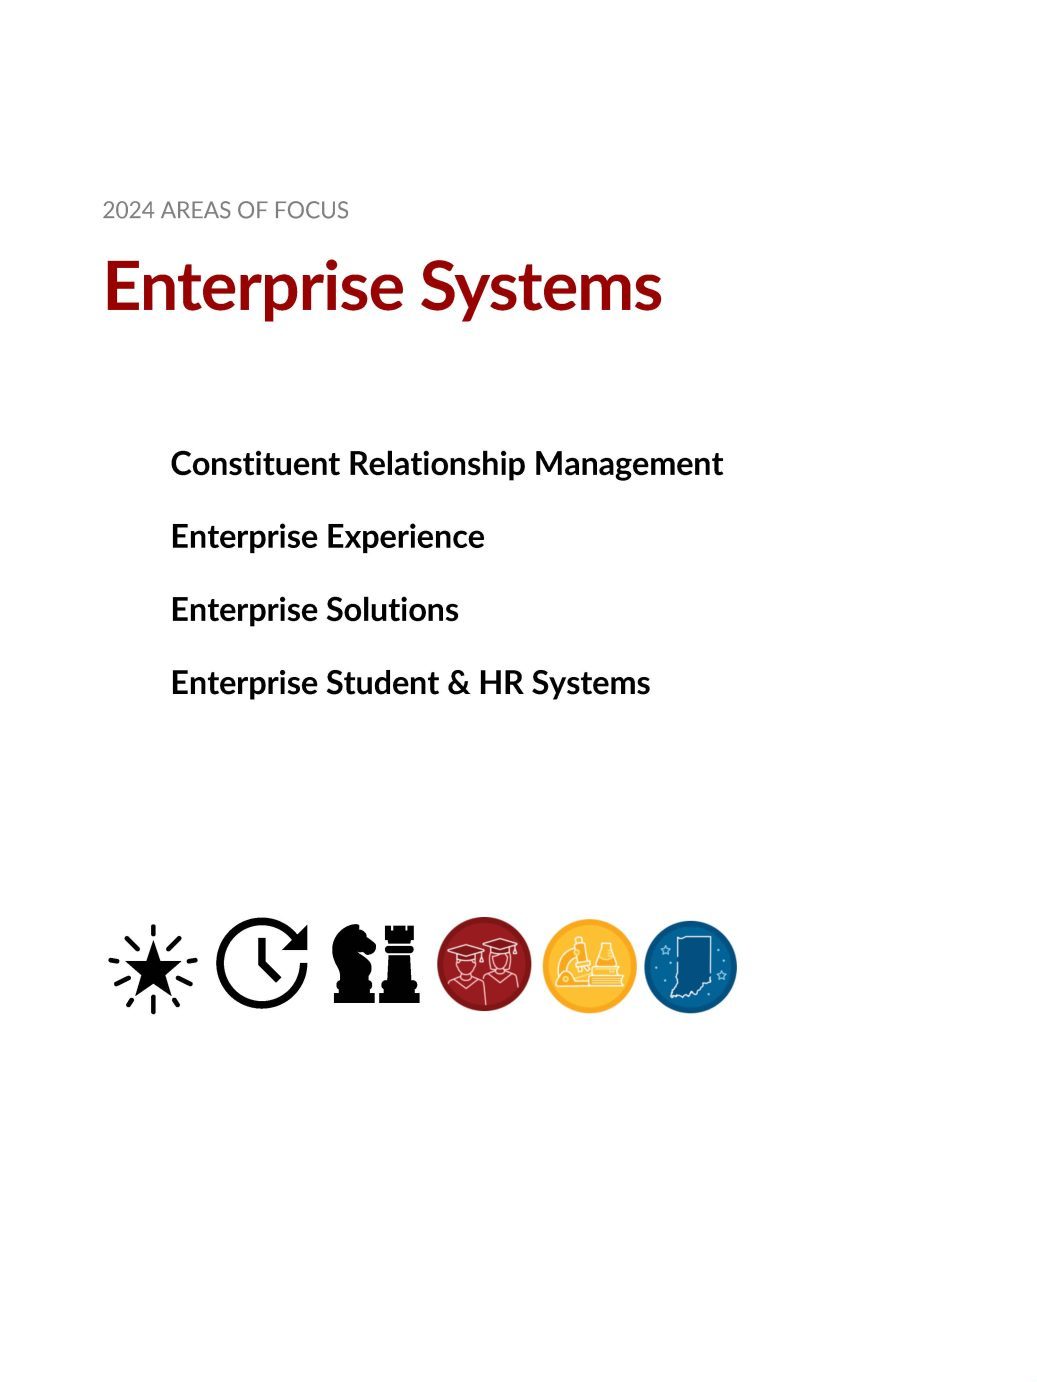 Cover image for 2024 Enterprise Systems Areas of Focus